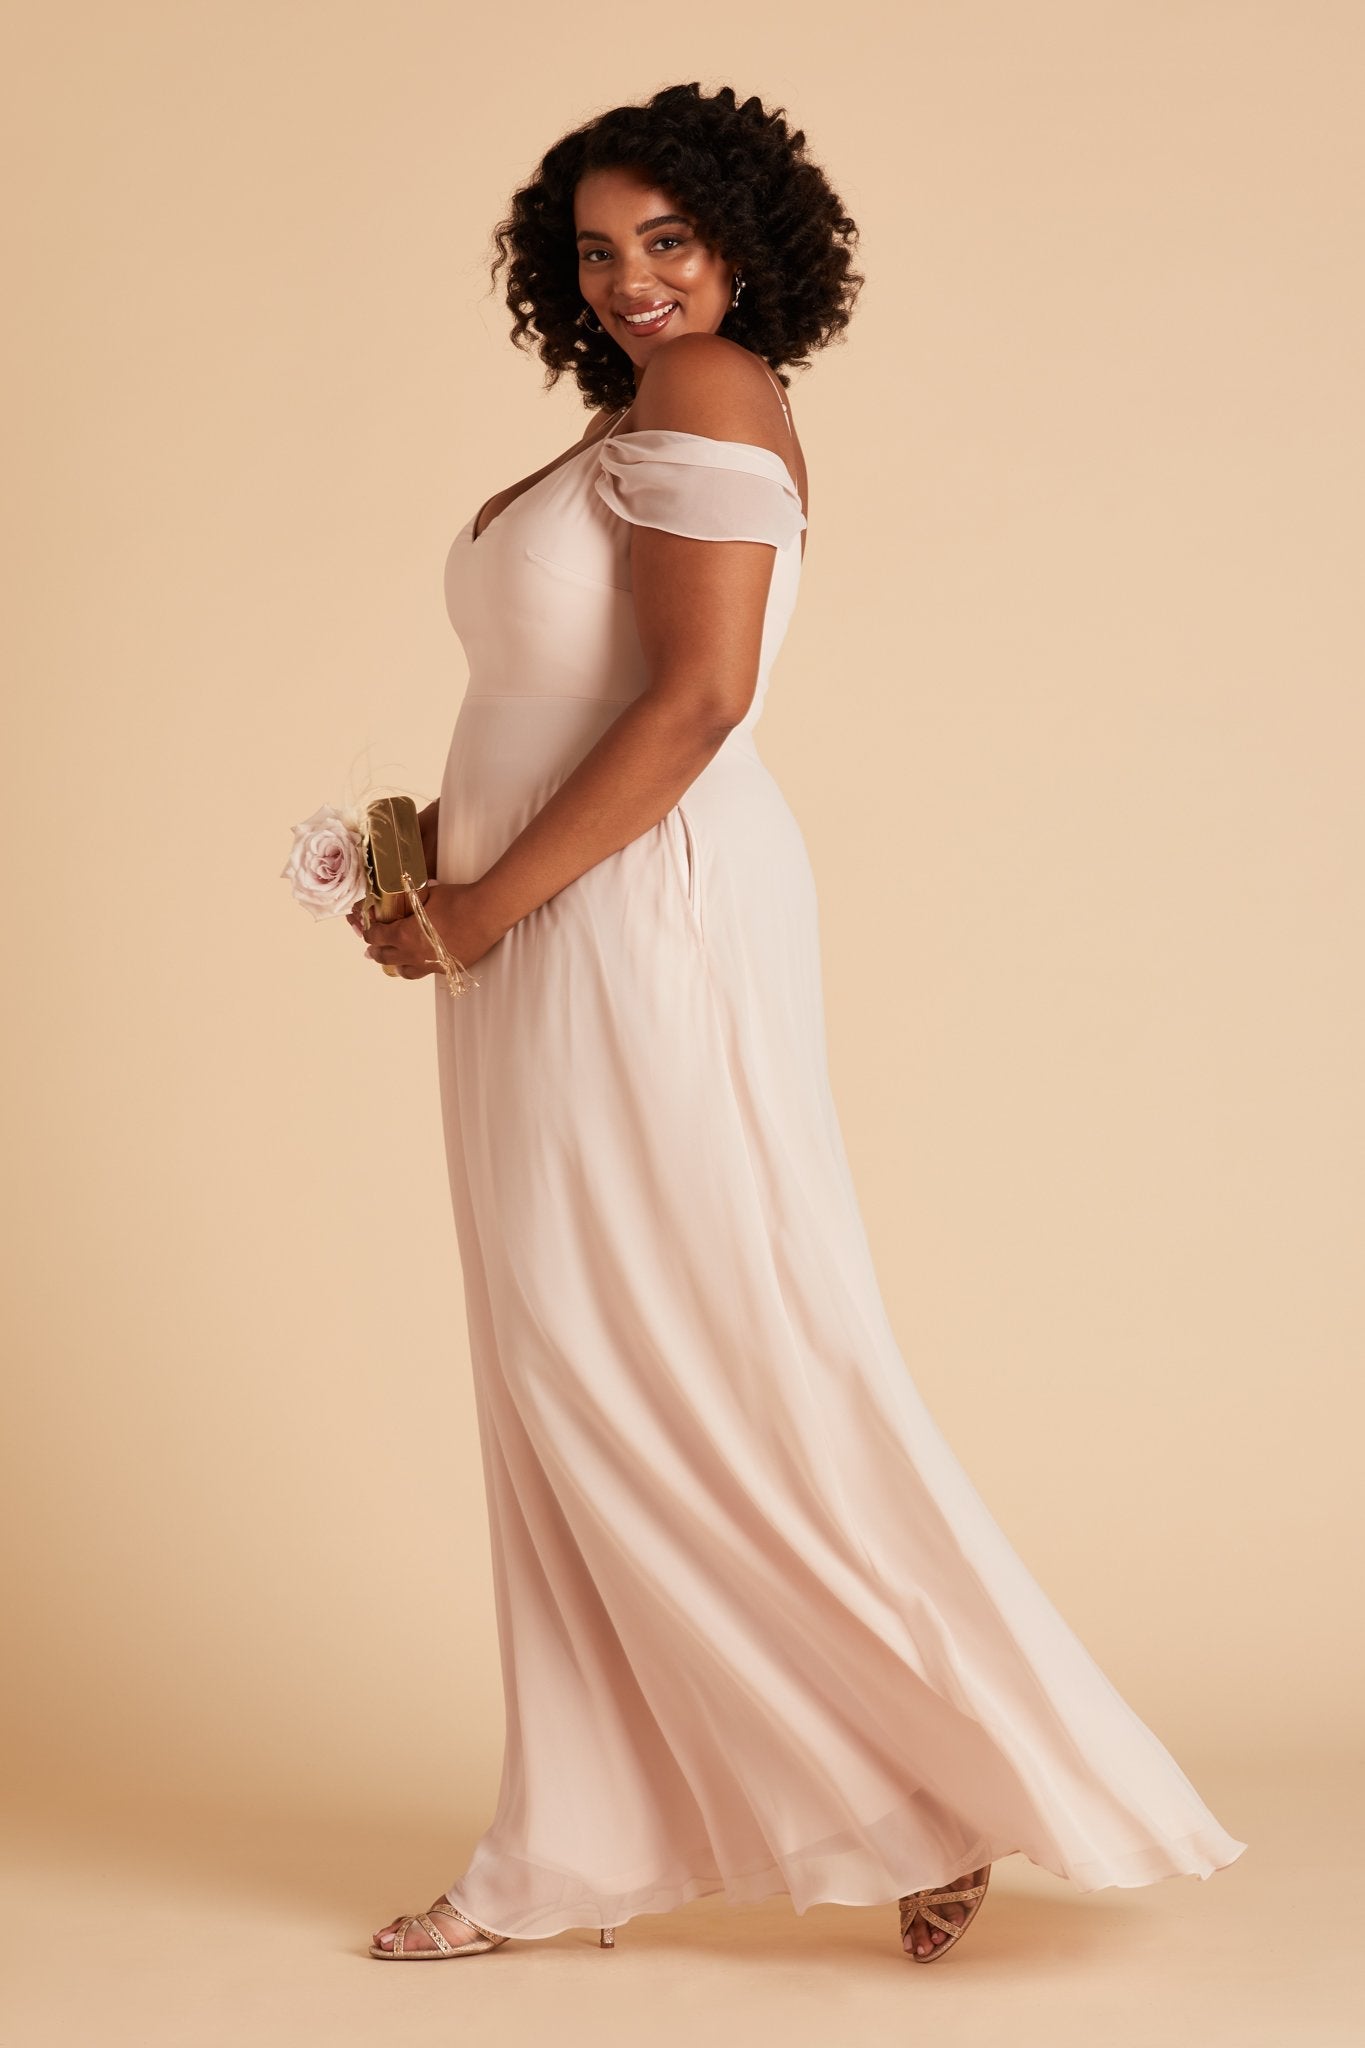 Devin convertible plus size bridesmaids dress in pale blush chiffon by Birdy Grey, side view